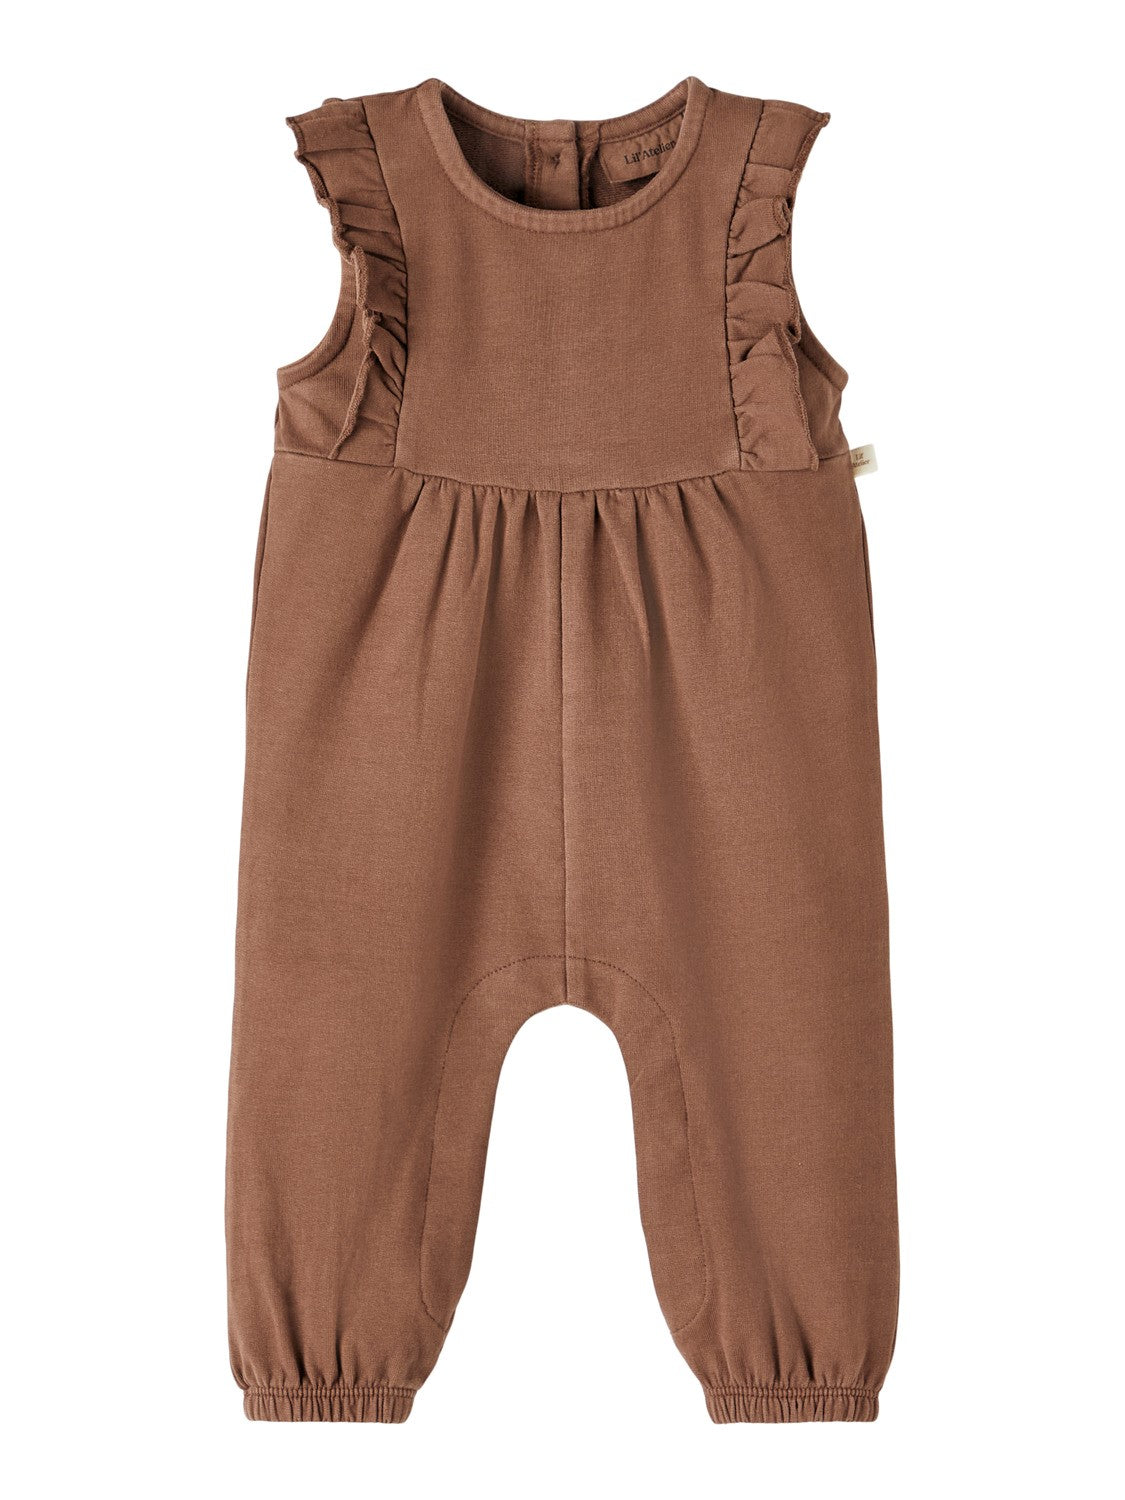 Lil Atelier Leslie Loose Sweat Overall - Rocky Road